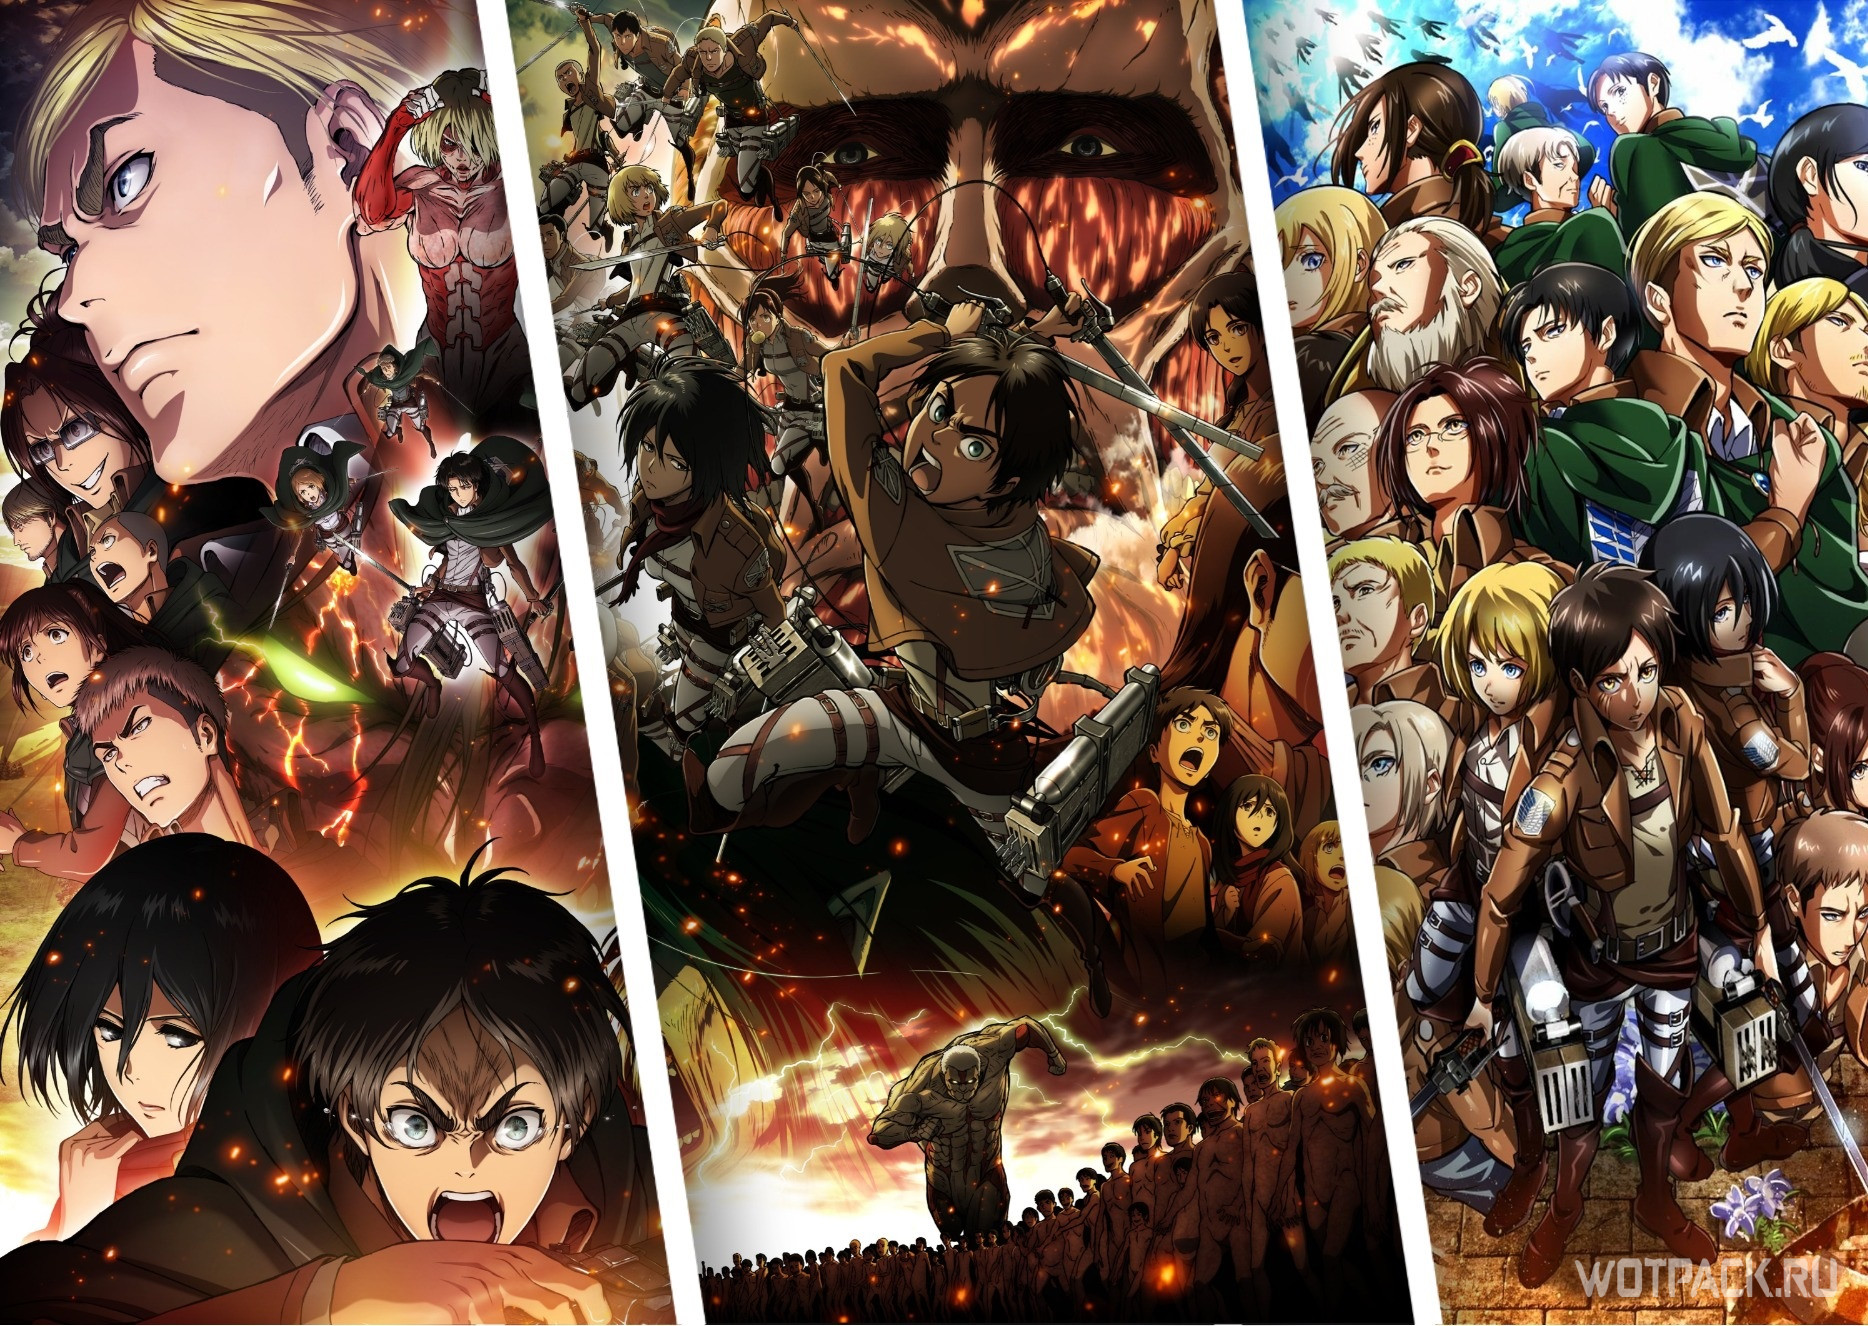 forsendelse Wrap bind Attack on Titan: all characters - names, height, age and zodiac signs